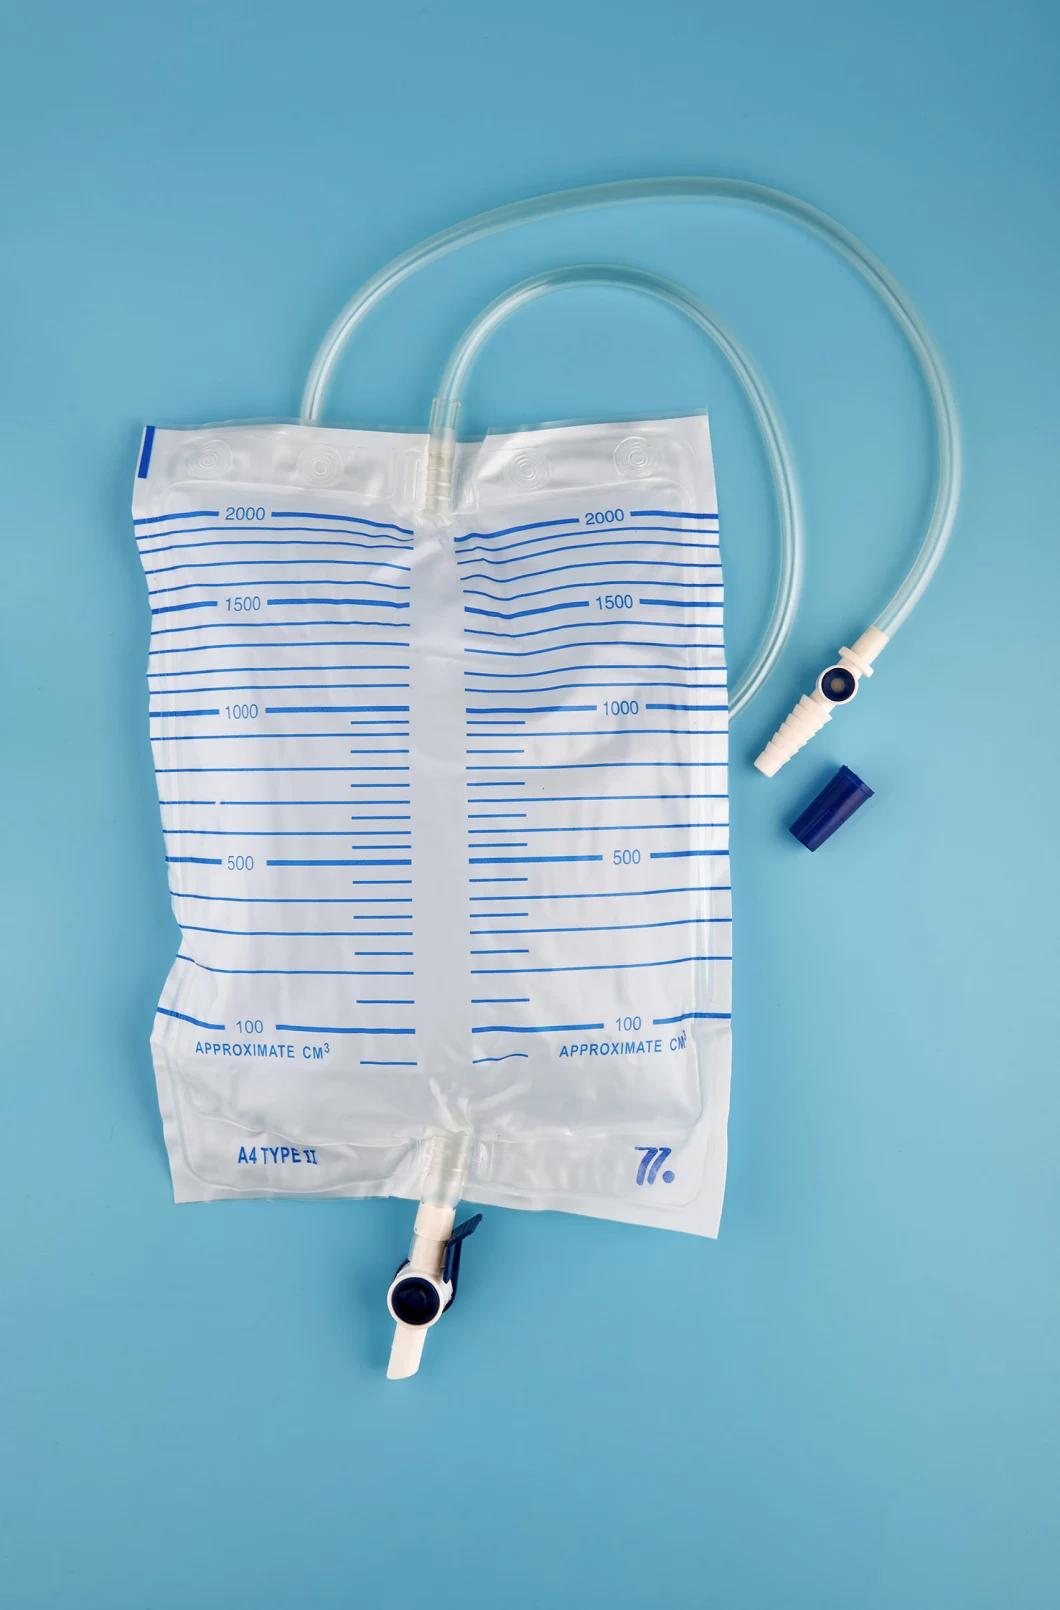 Disposable Meter Scale Type Urine Bag with CE Certificate